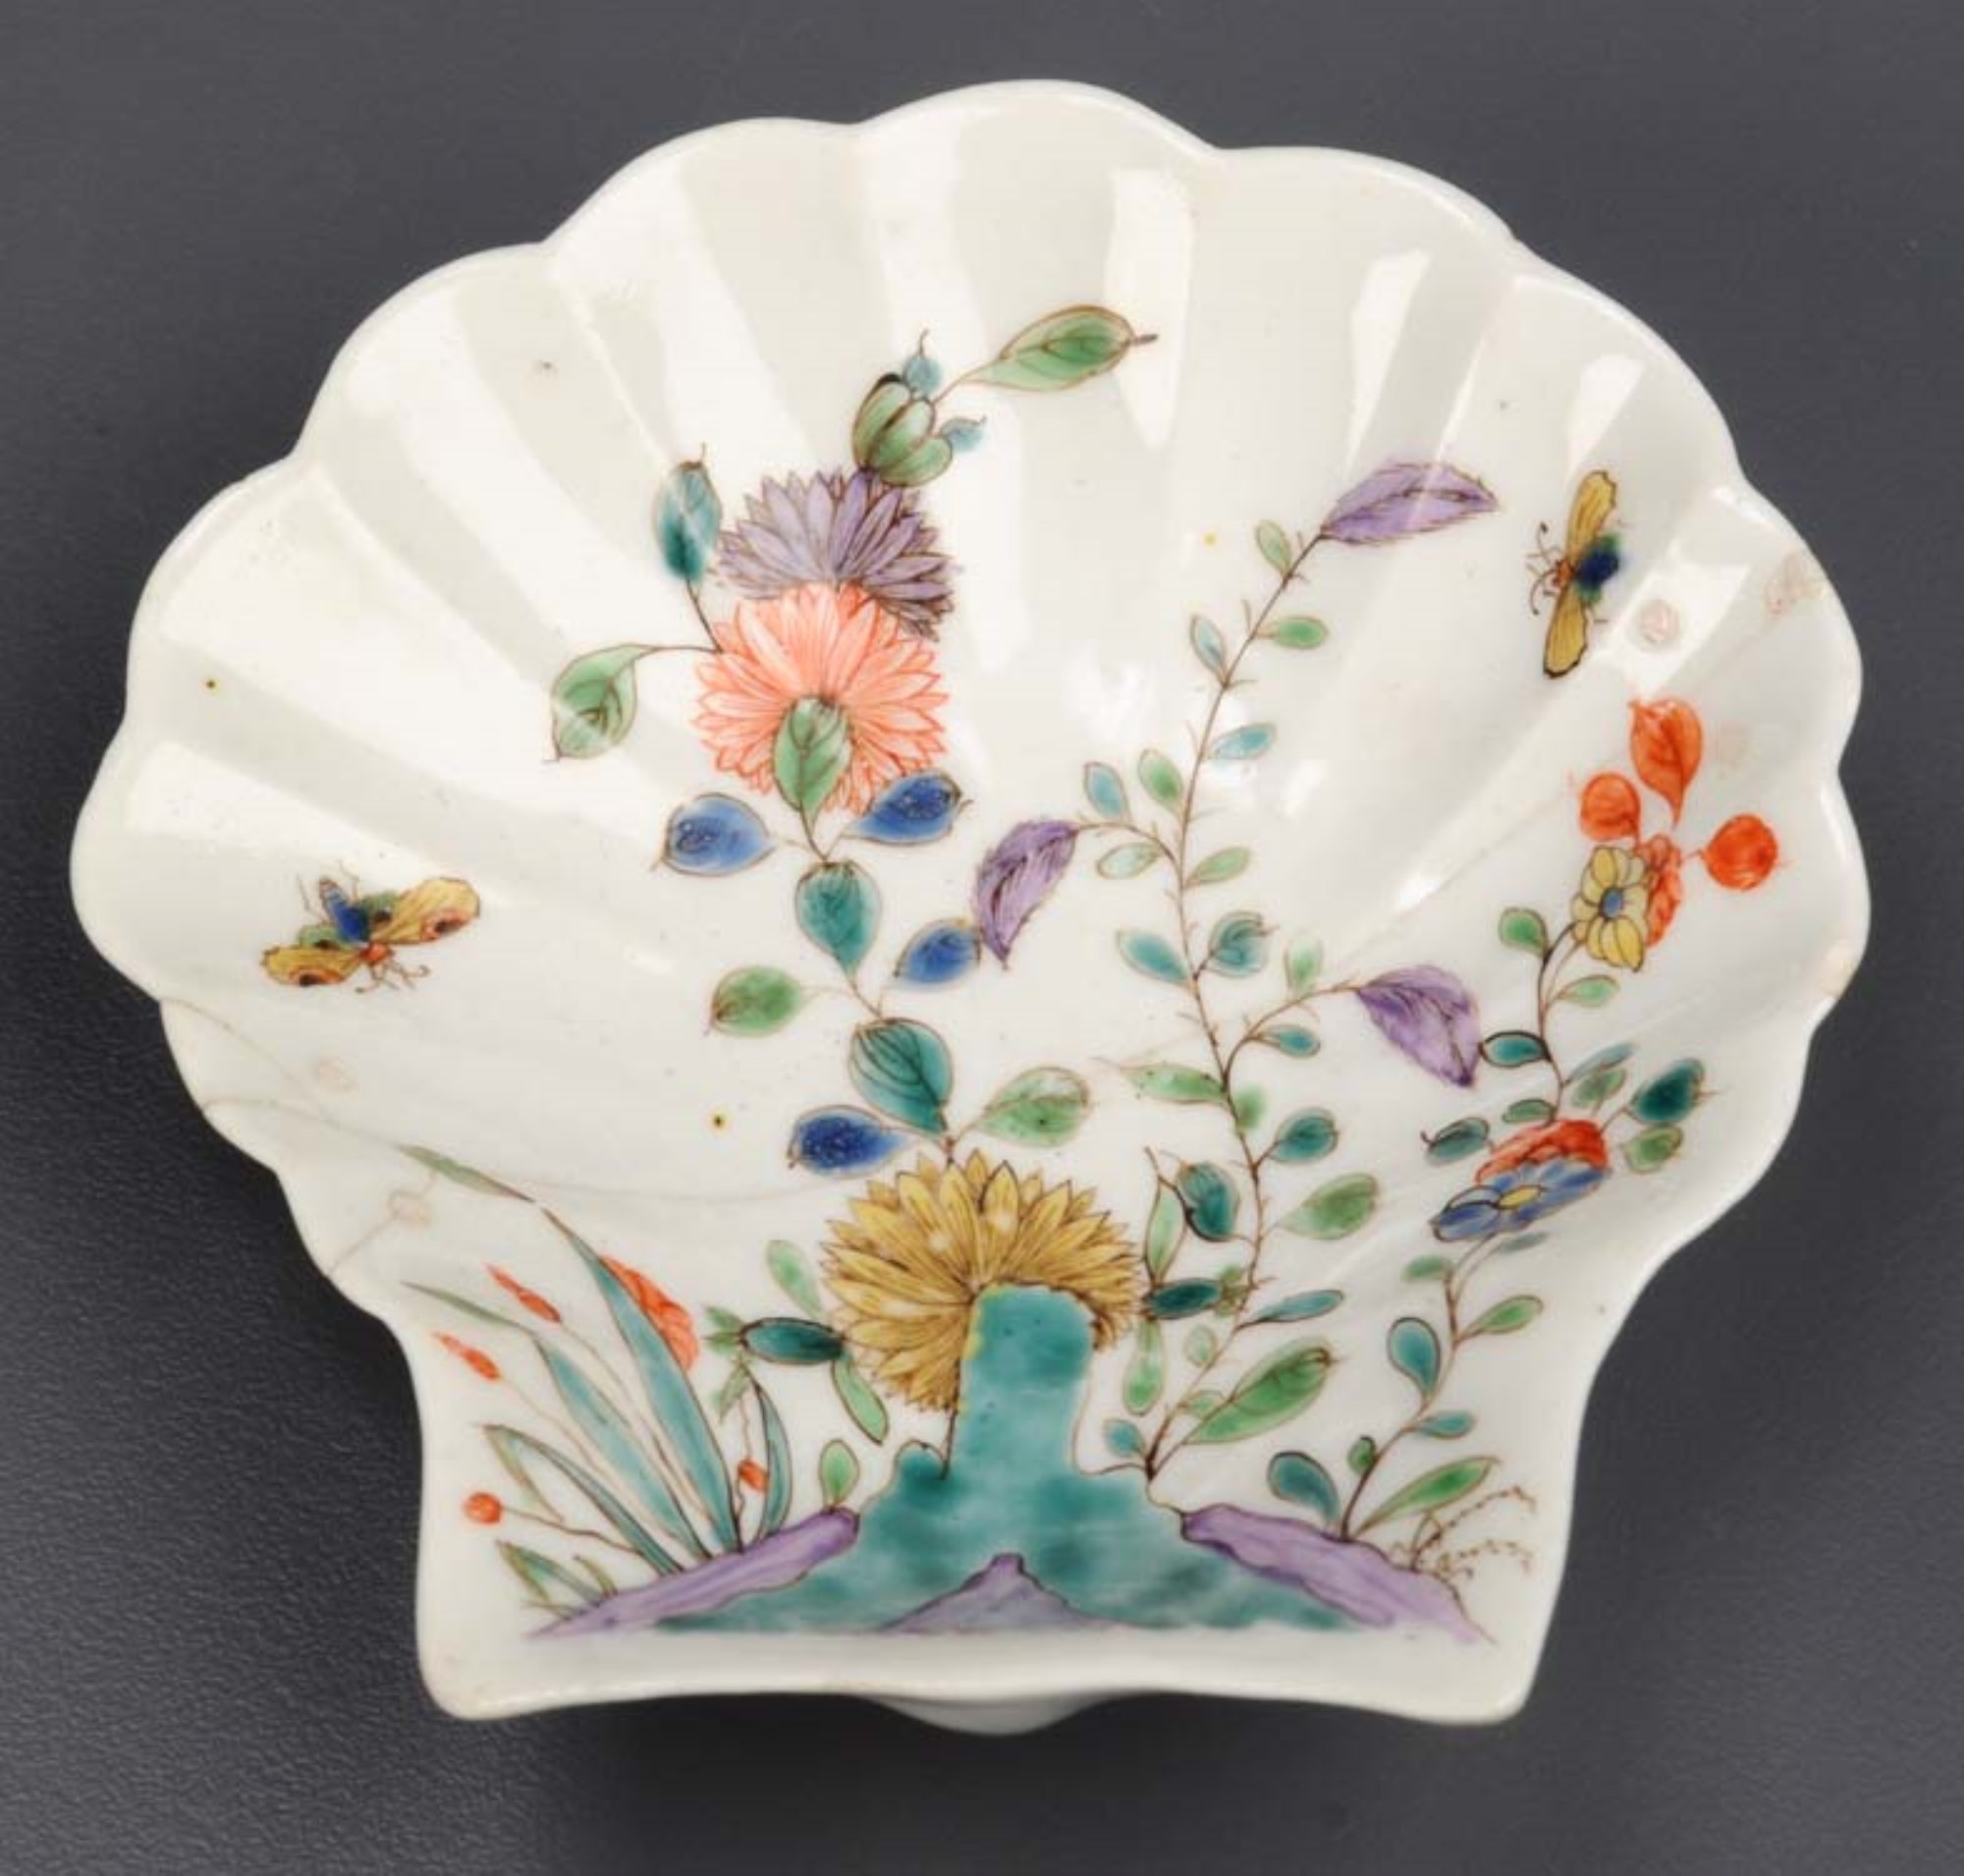 An early Worcester shell dish, circa 1753-54